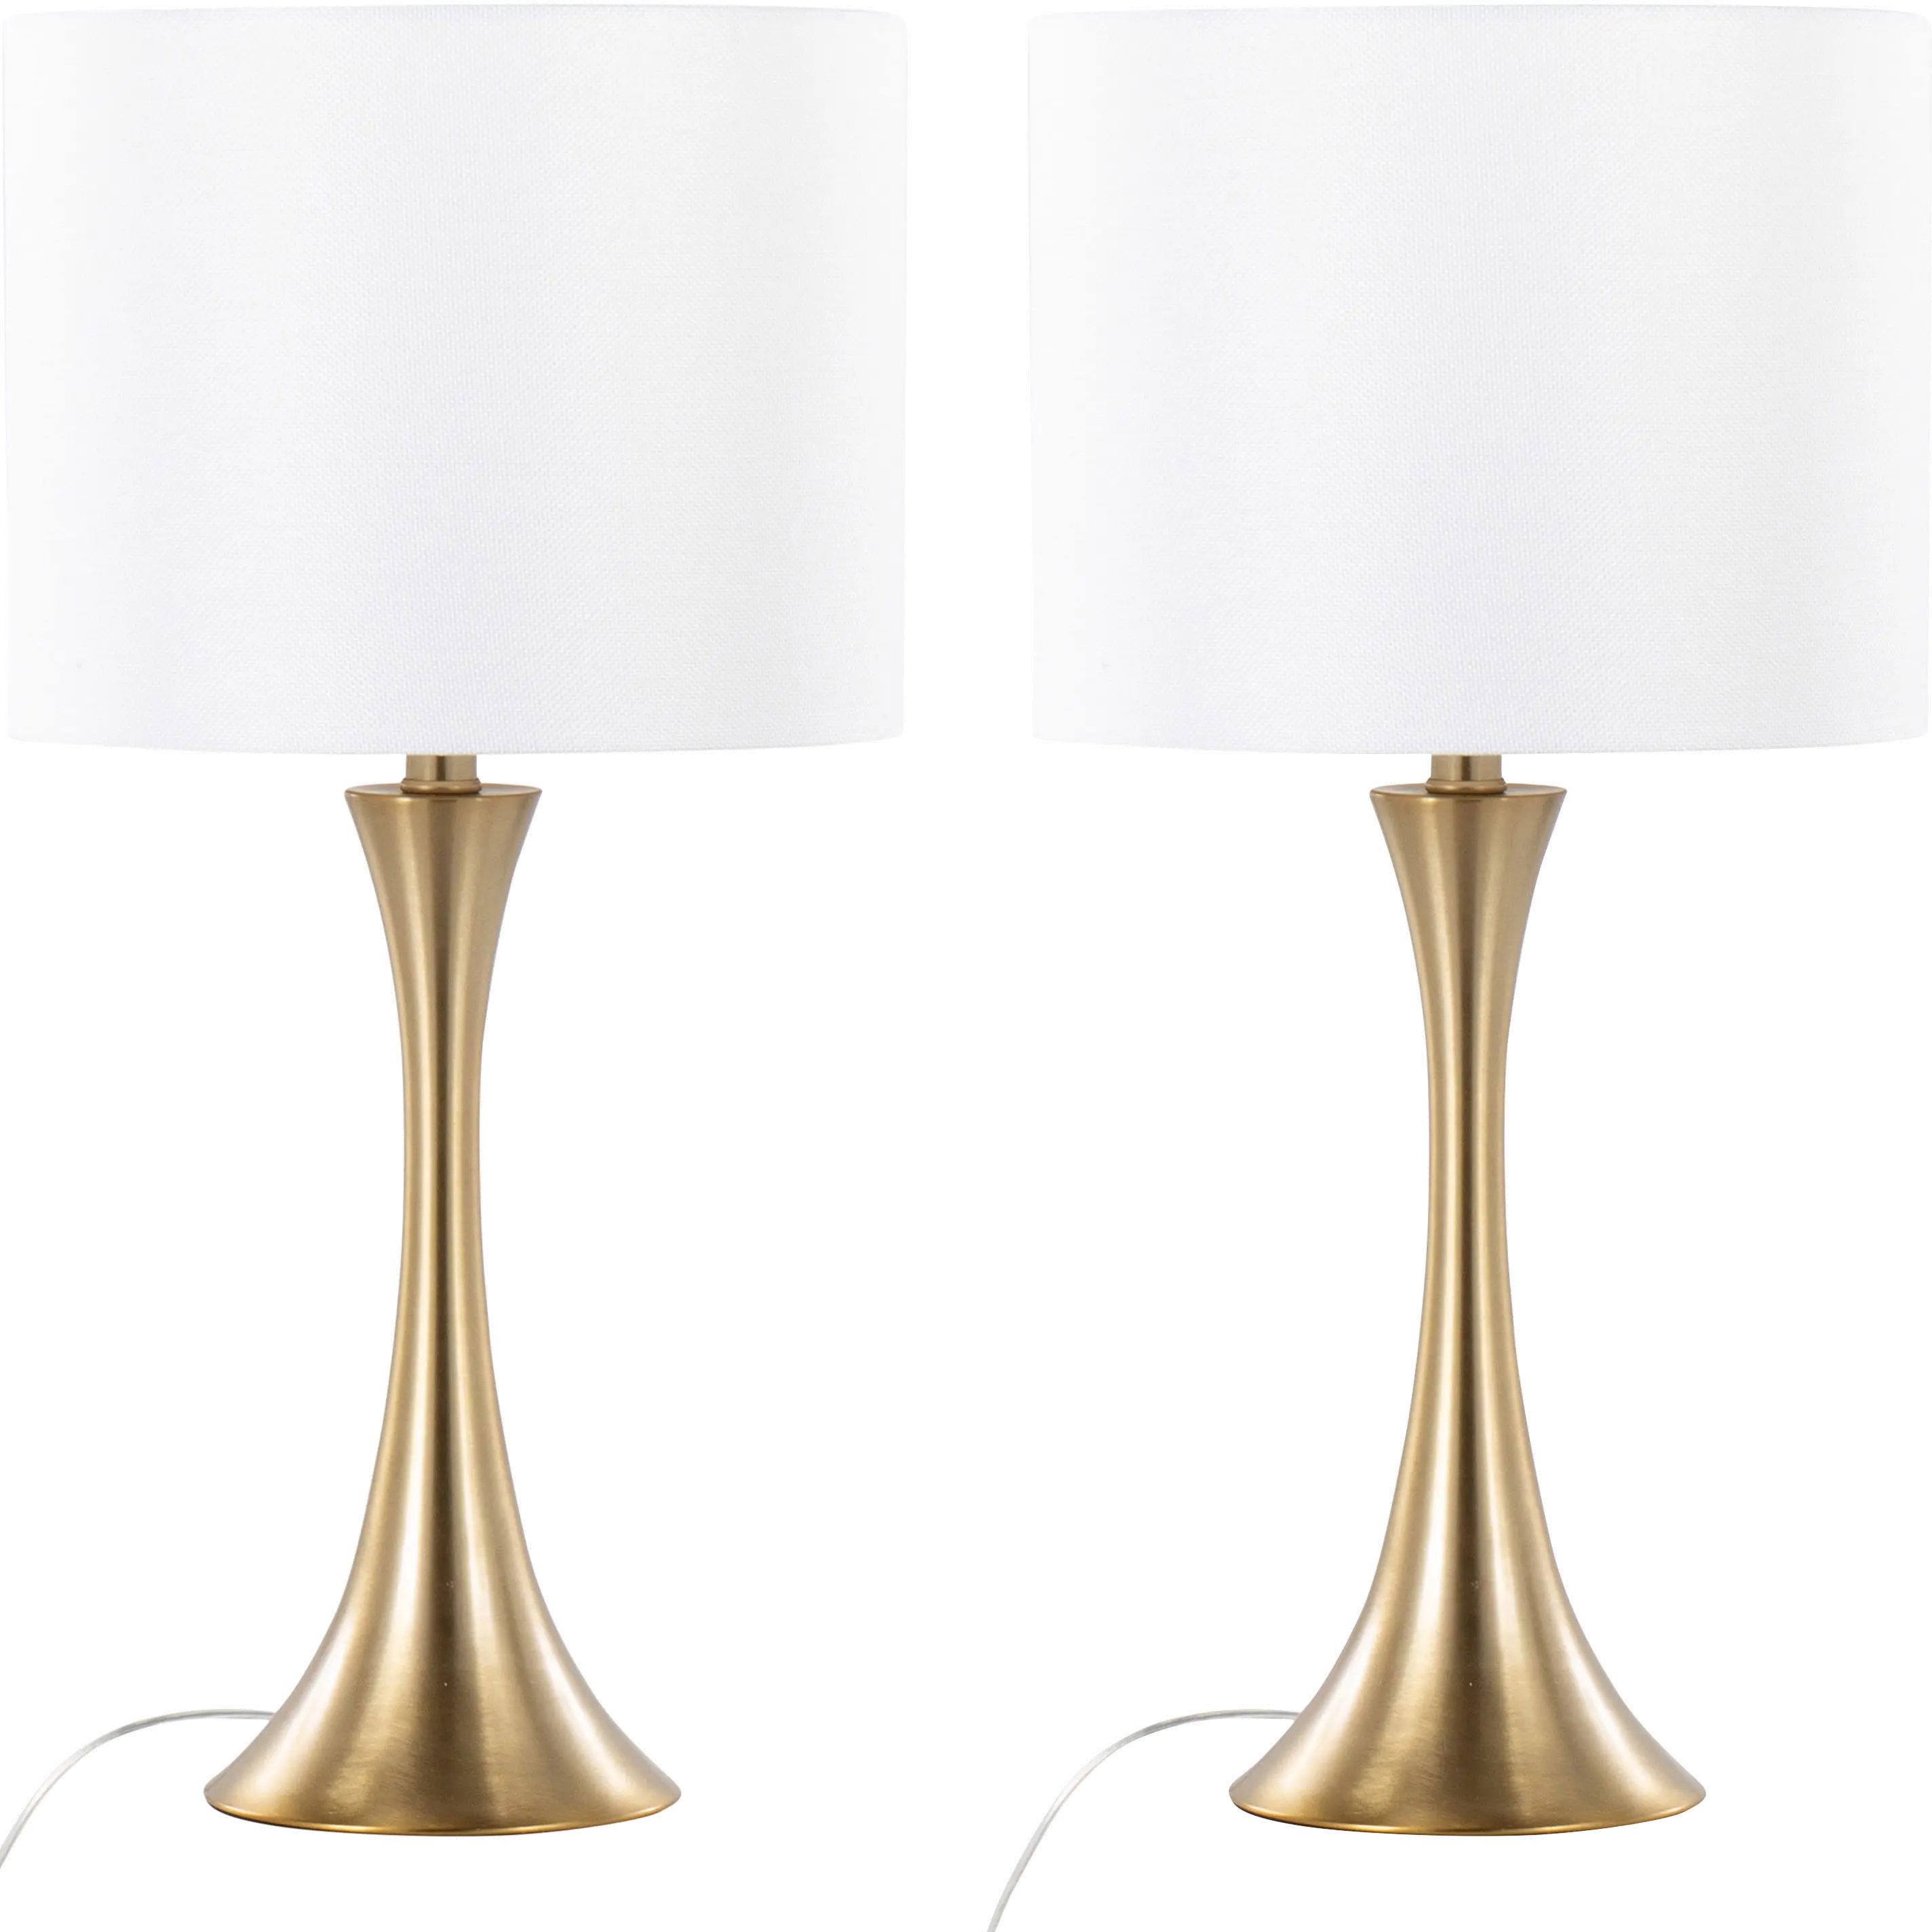 Lenuxe Gold Table Lamps with White Shades, Set of 2